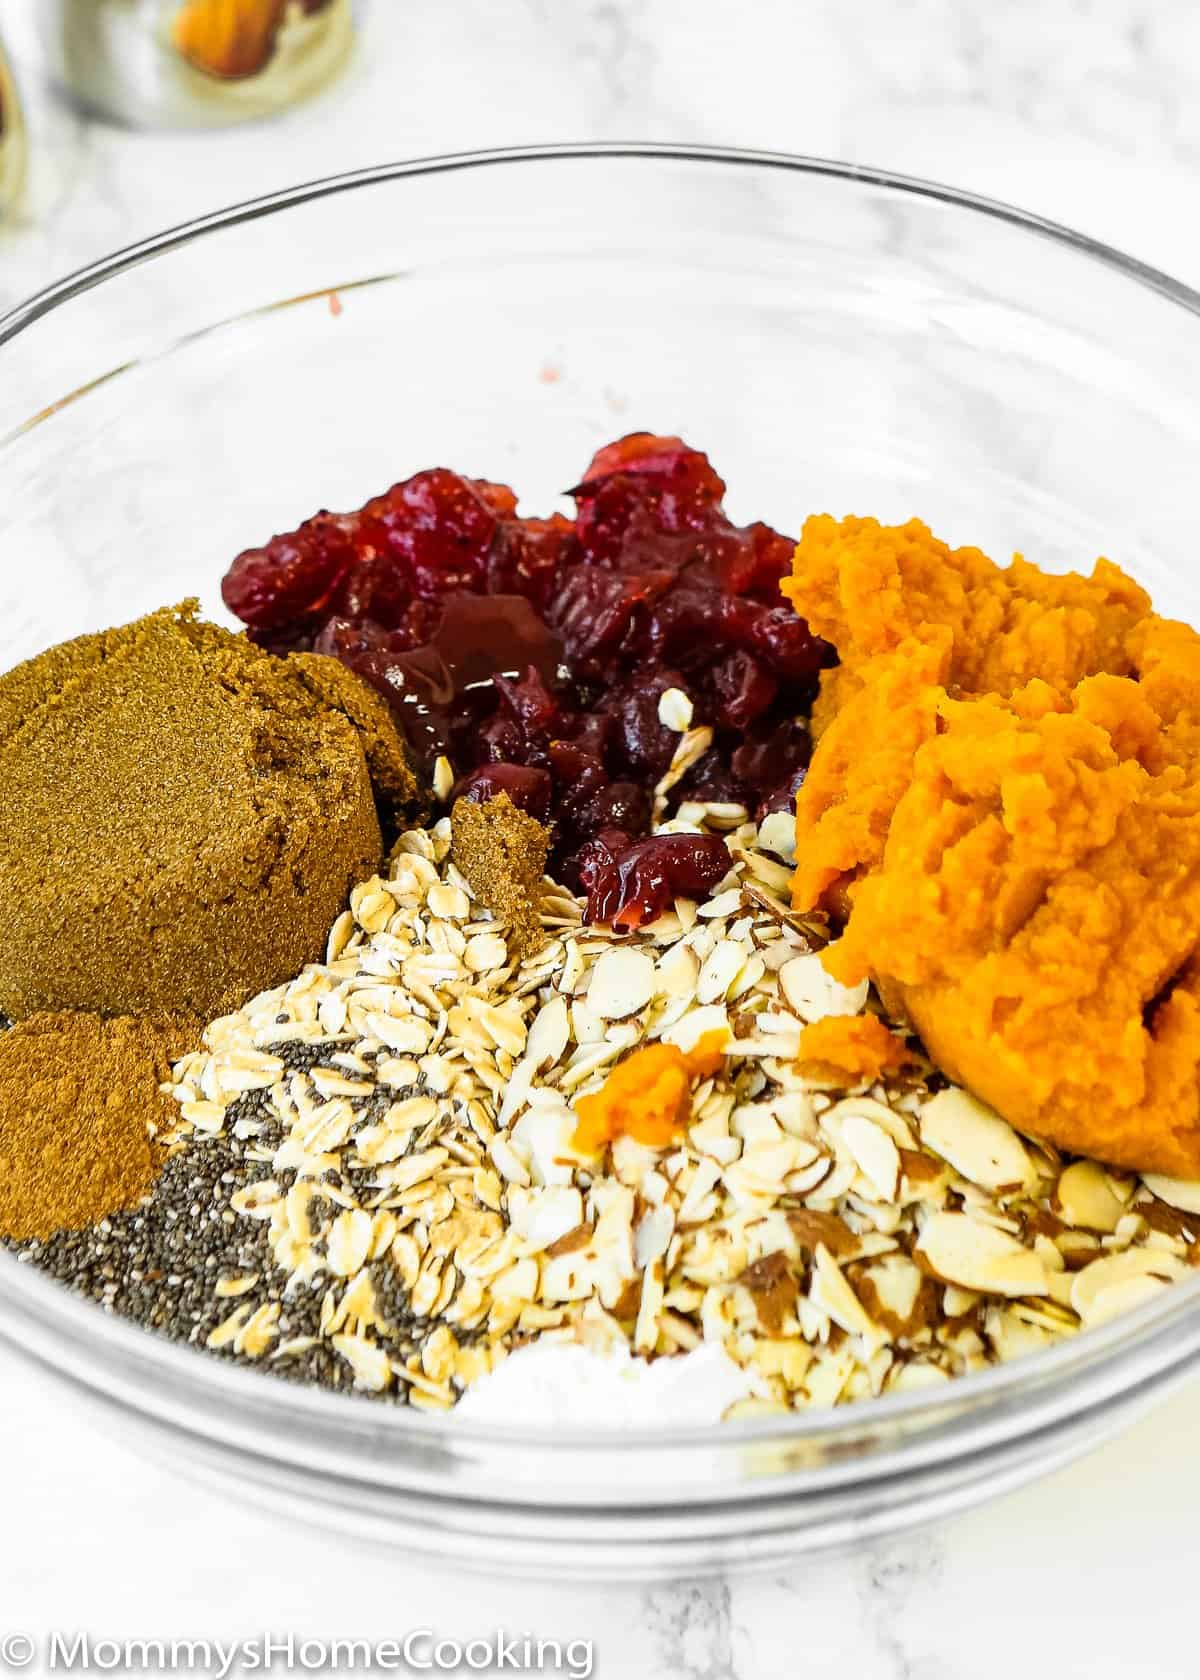 Eggless Pumpkin Baked Oatmeal ingredients in a bowl